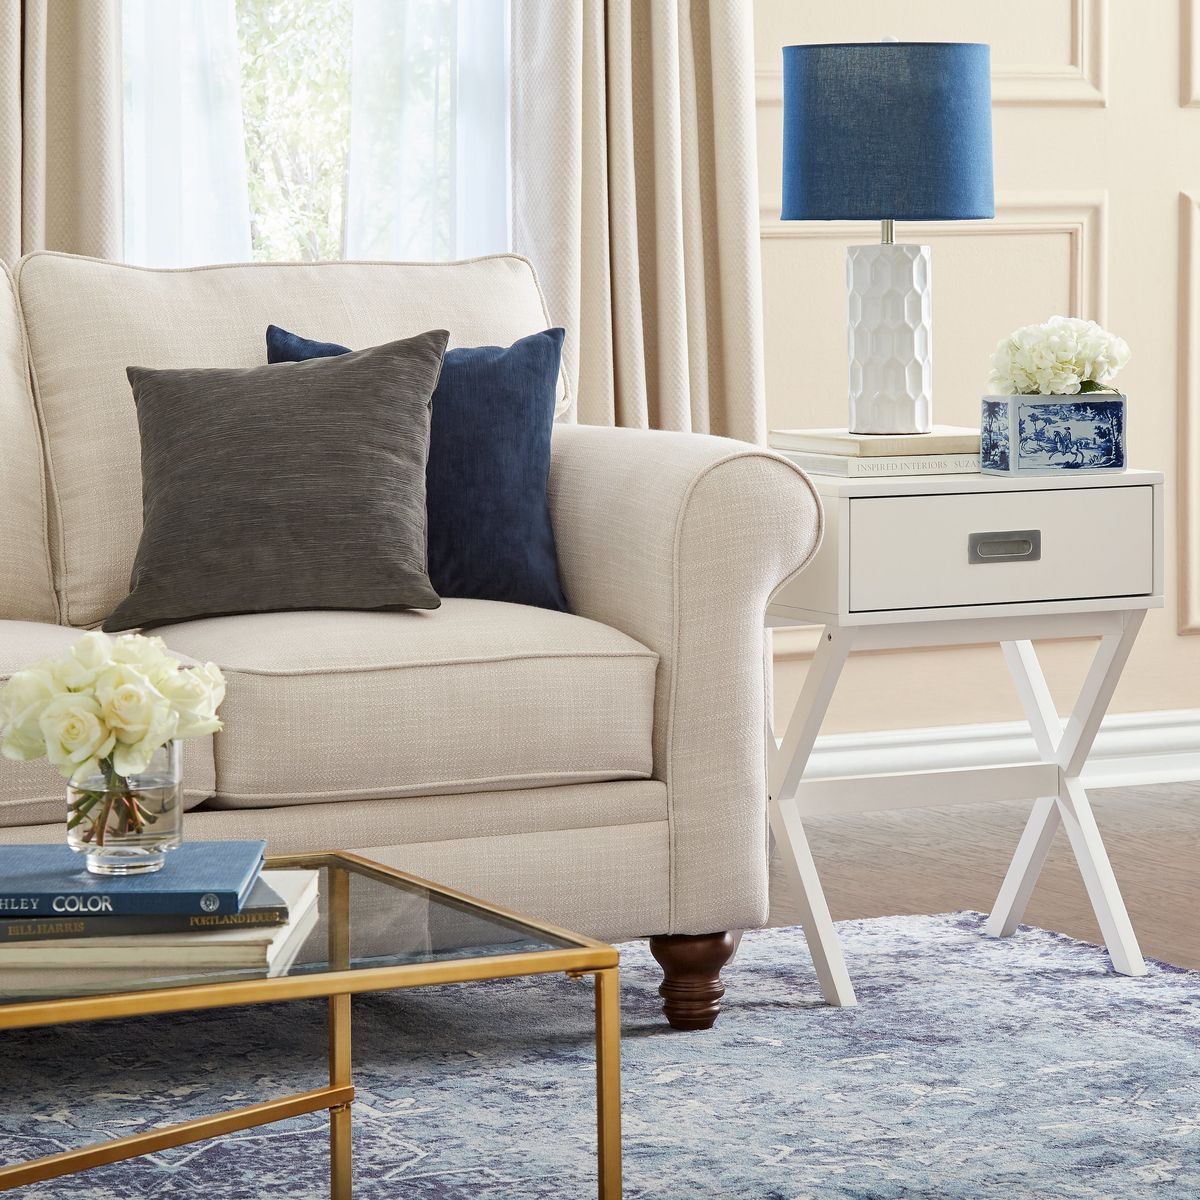 Amazon’s New Furniture Brand Is the Latest Reason To Love Prime Shipping